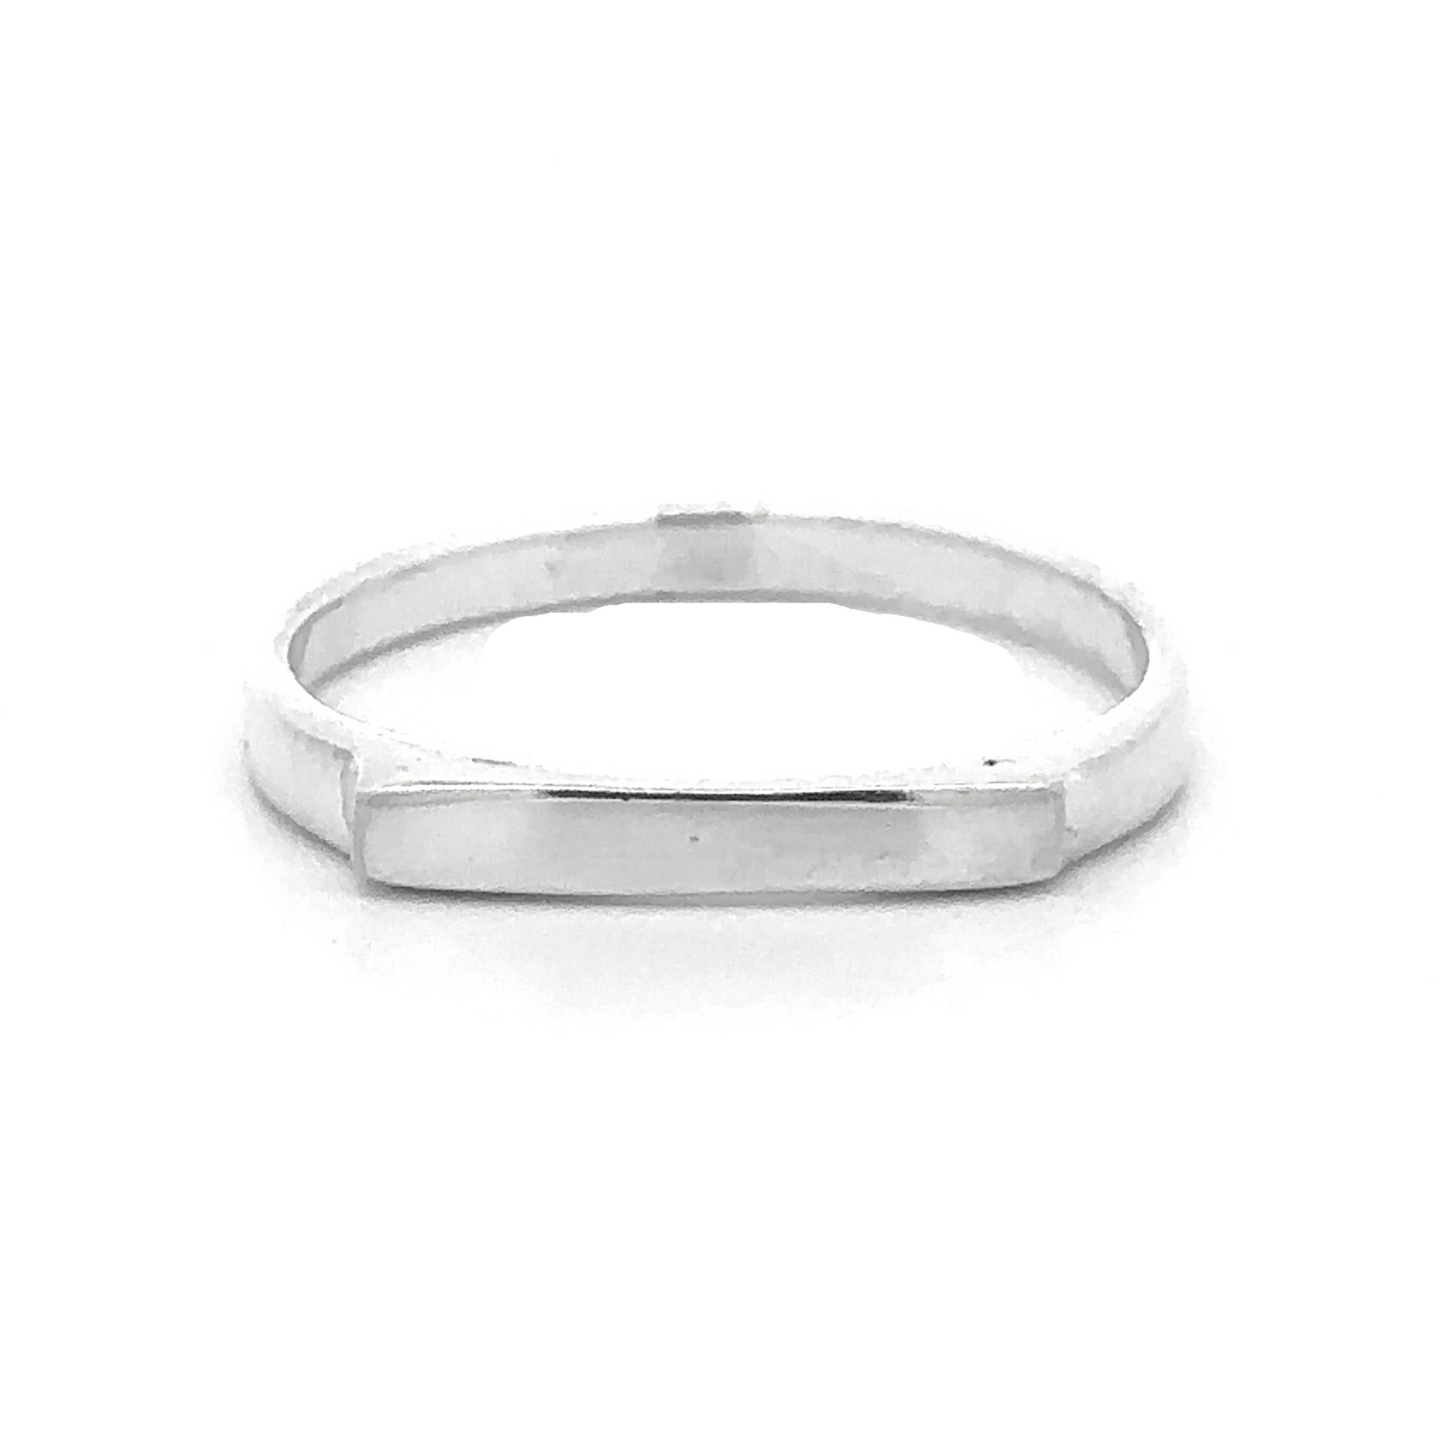 
                  
                    A Dainty Silver Bar Ring with a rectangular flat surface at the front, shown against a plain white background, epitomizes modern minimalism.
                  
                